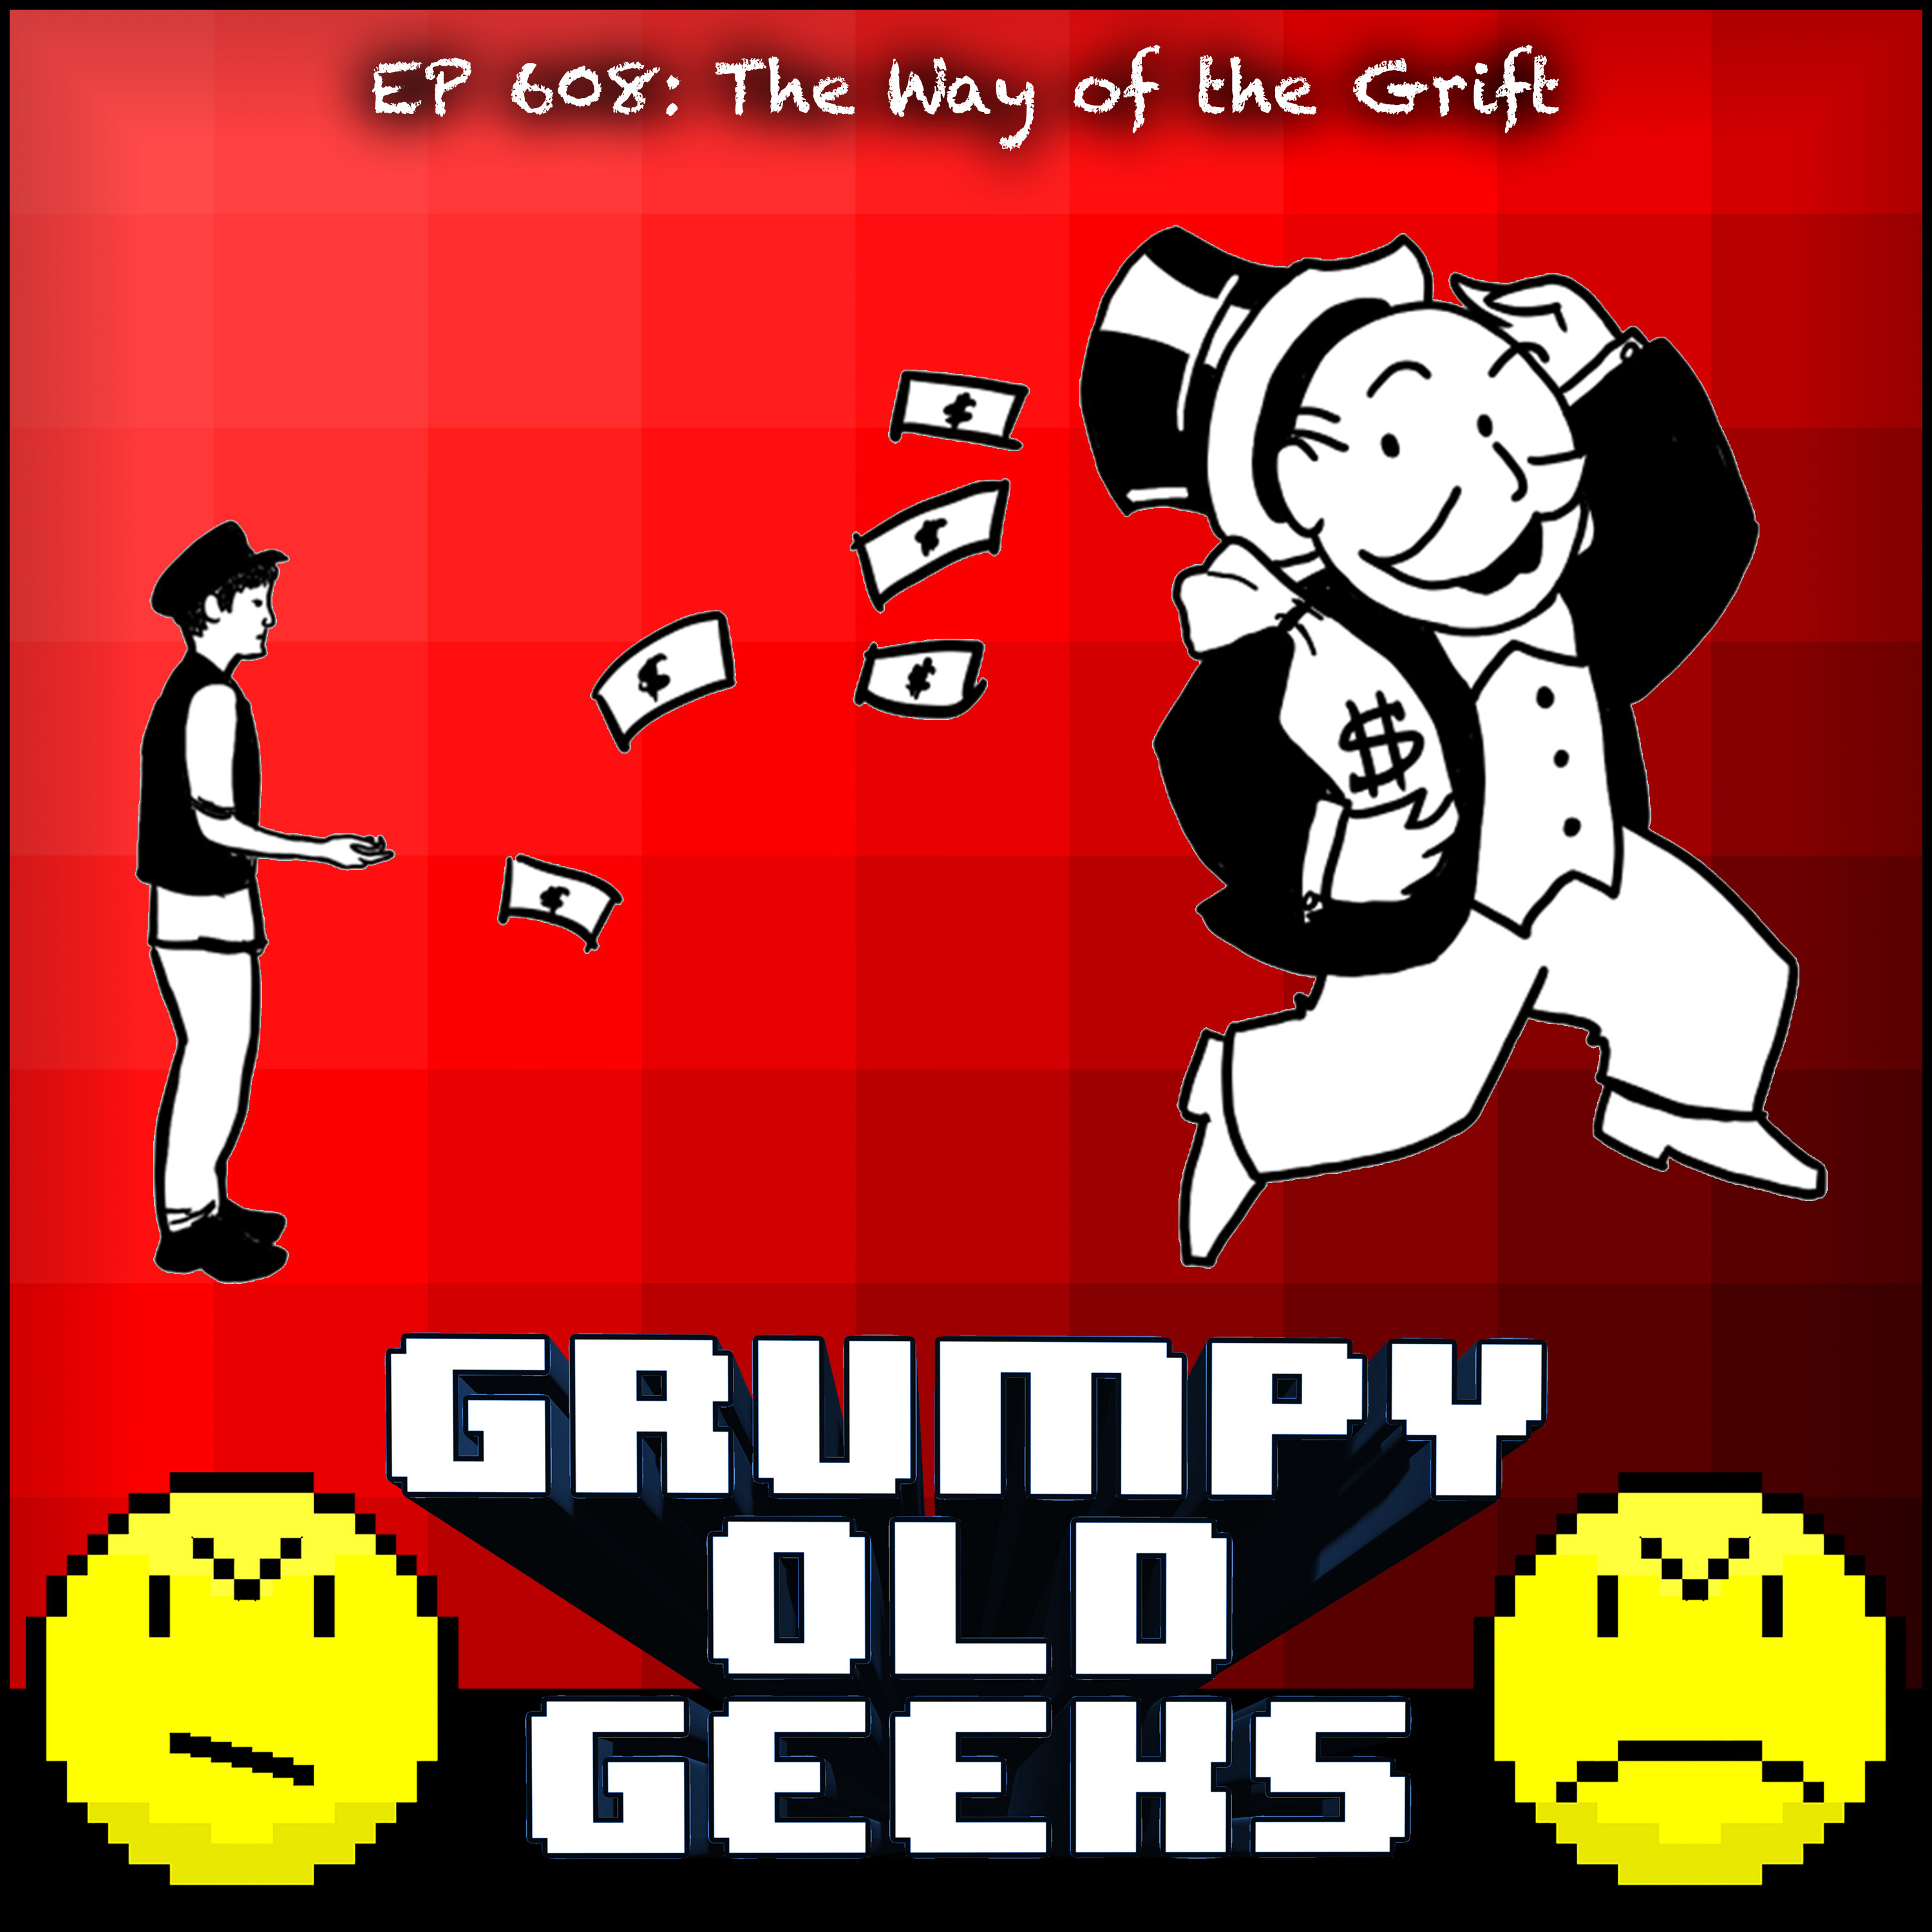 608: The Way of the Grift